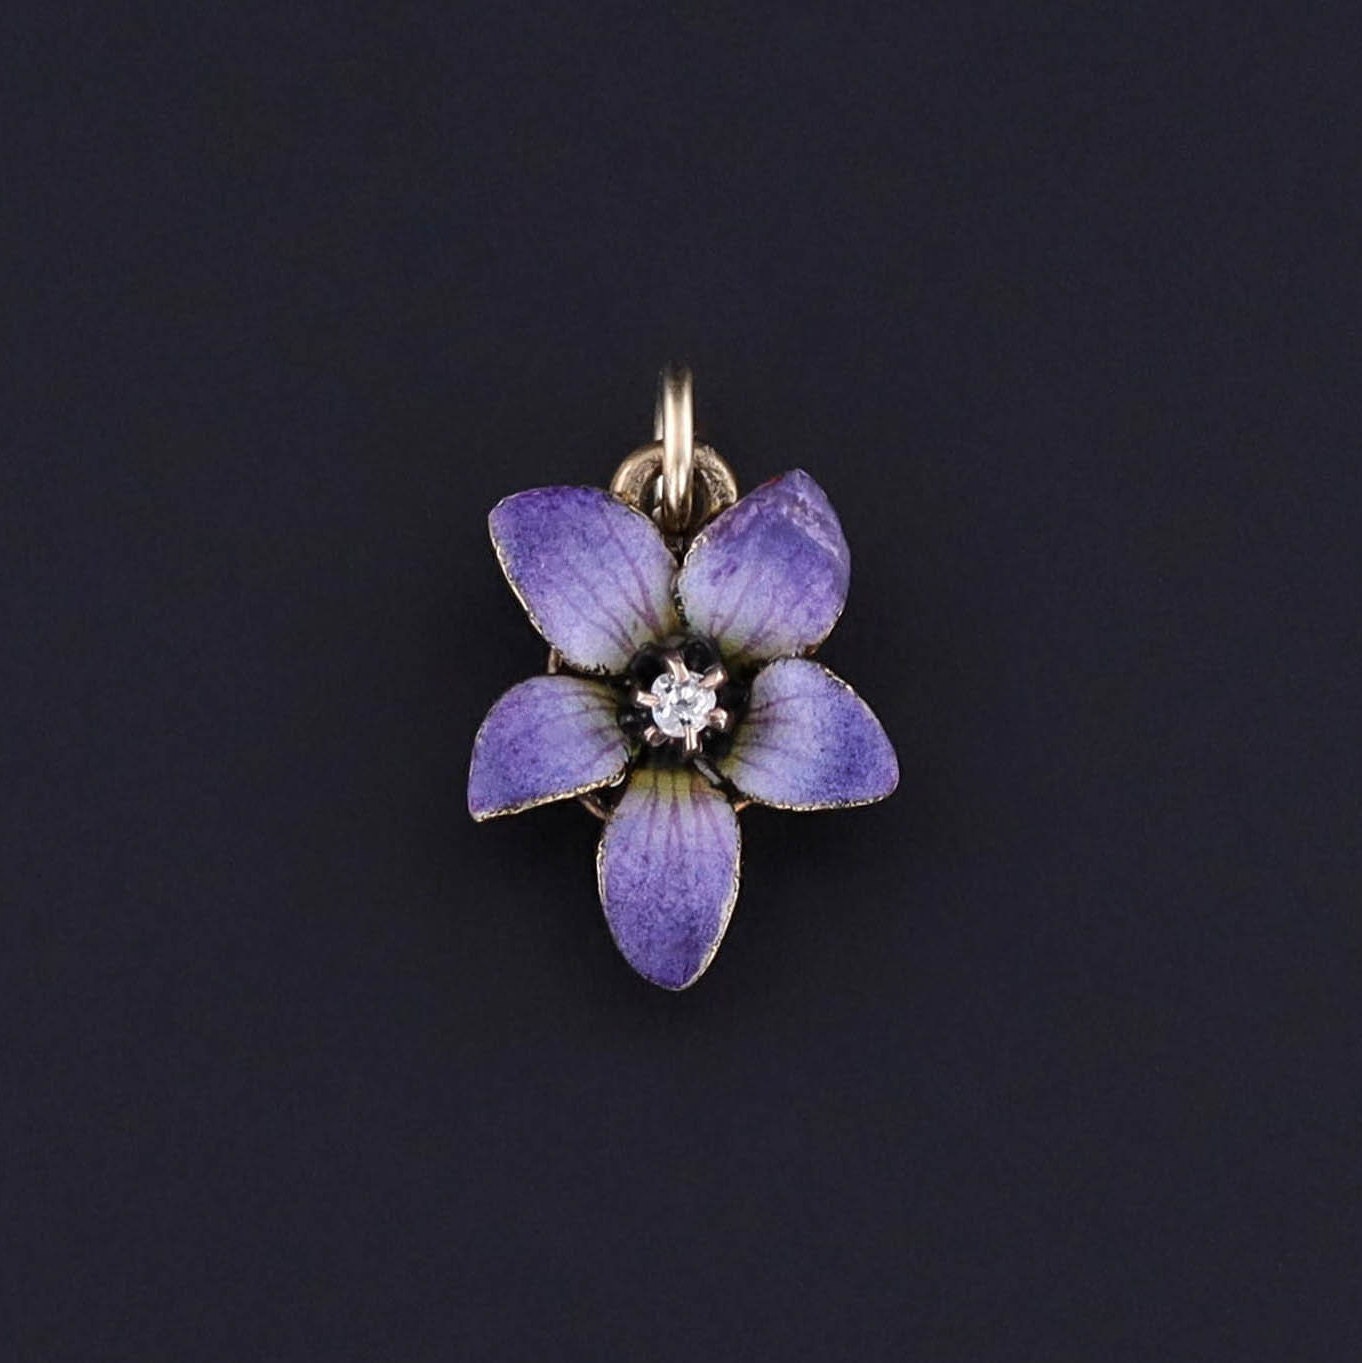 An antique enamel violet charm with a diamond accent. The charm is 14k gold and was originally an antique stickpin. Perfect for any flower lover or collector of antique jewelry. Also perfect for anyone with a charm bracelet or charm necklace.